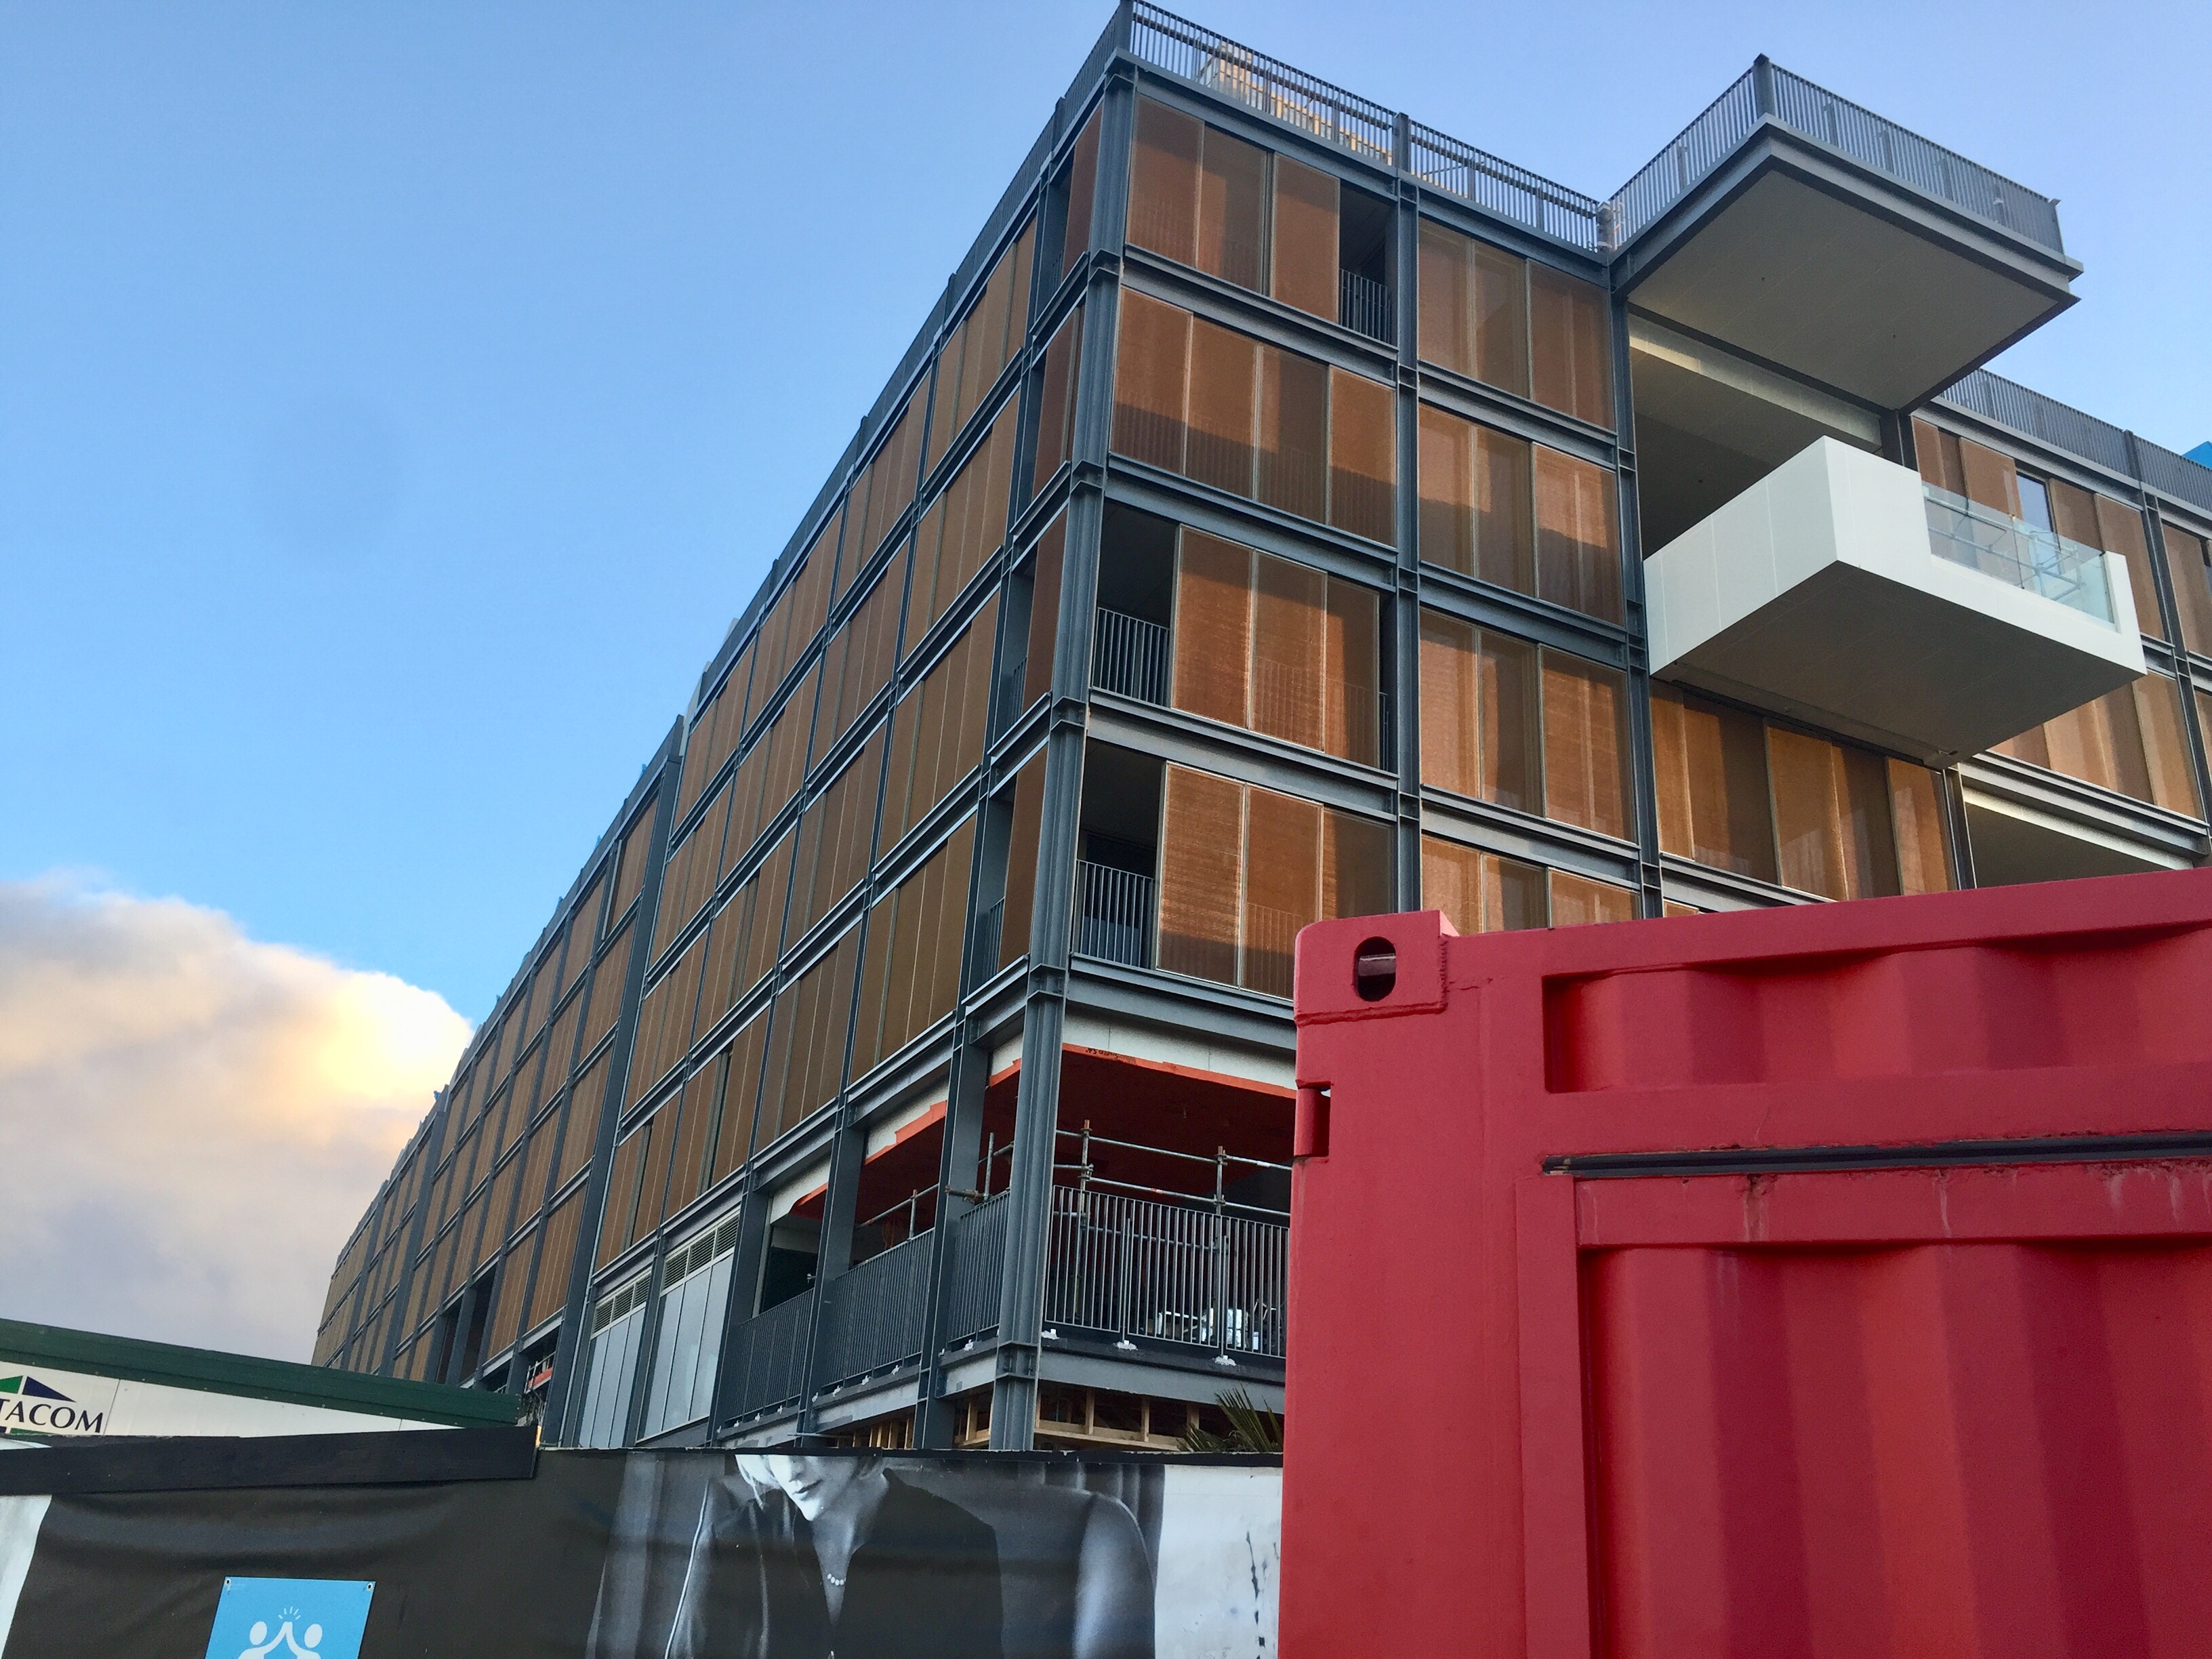 a building with balconies and a red container